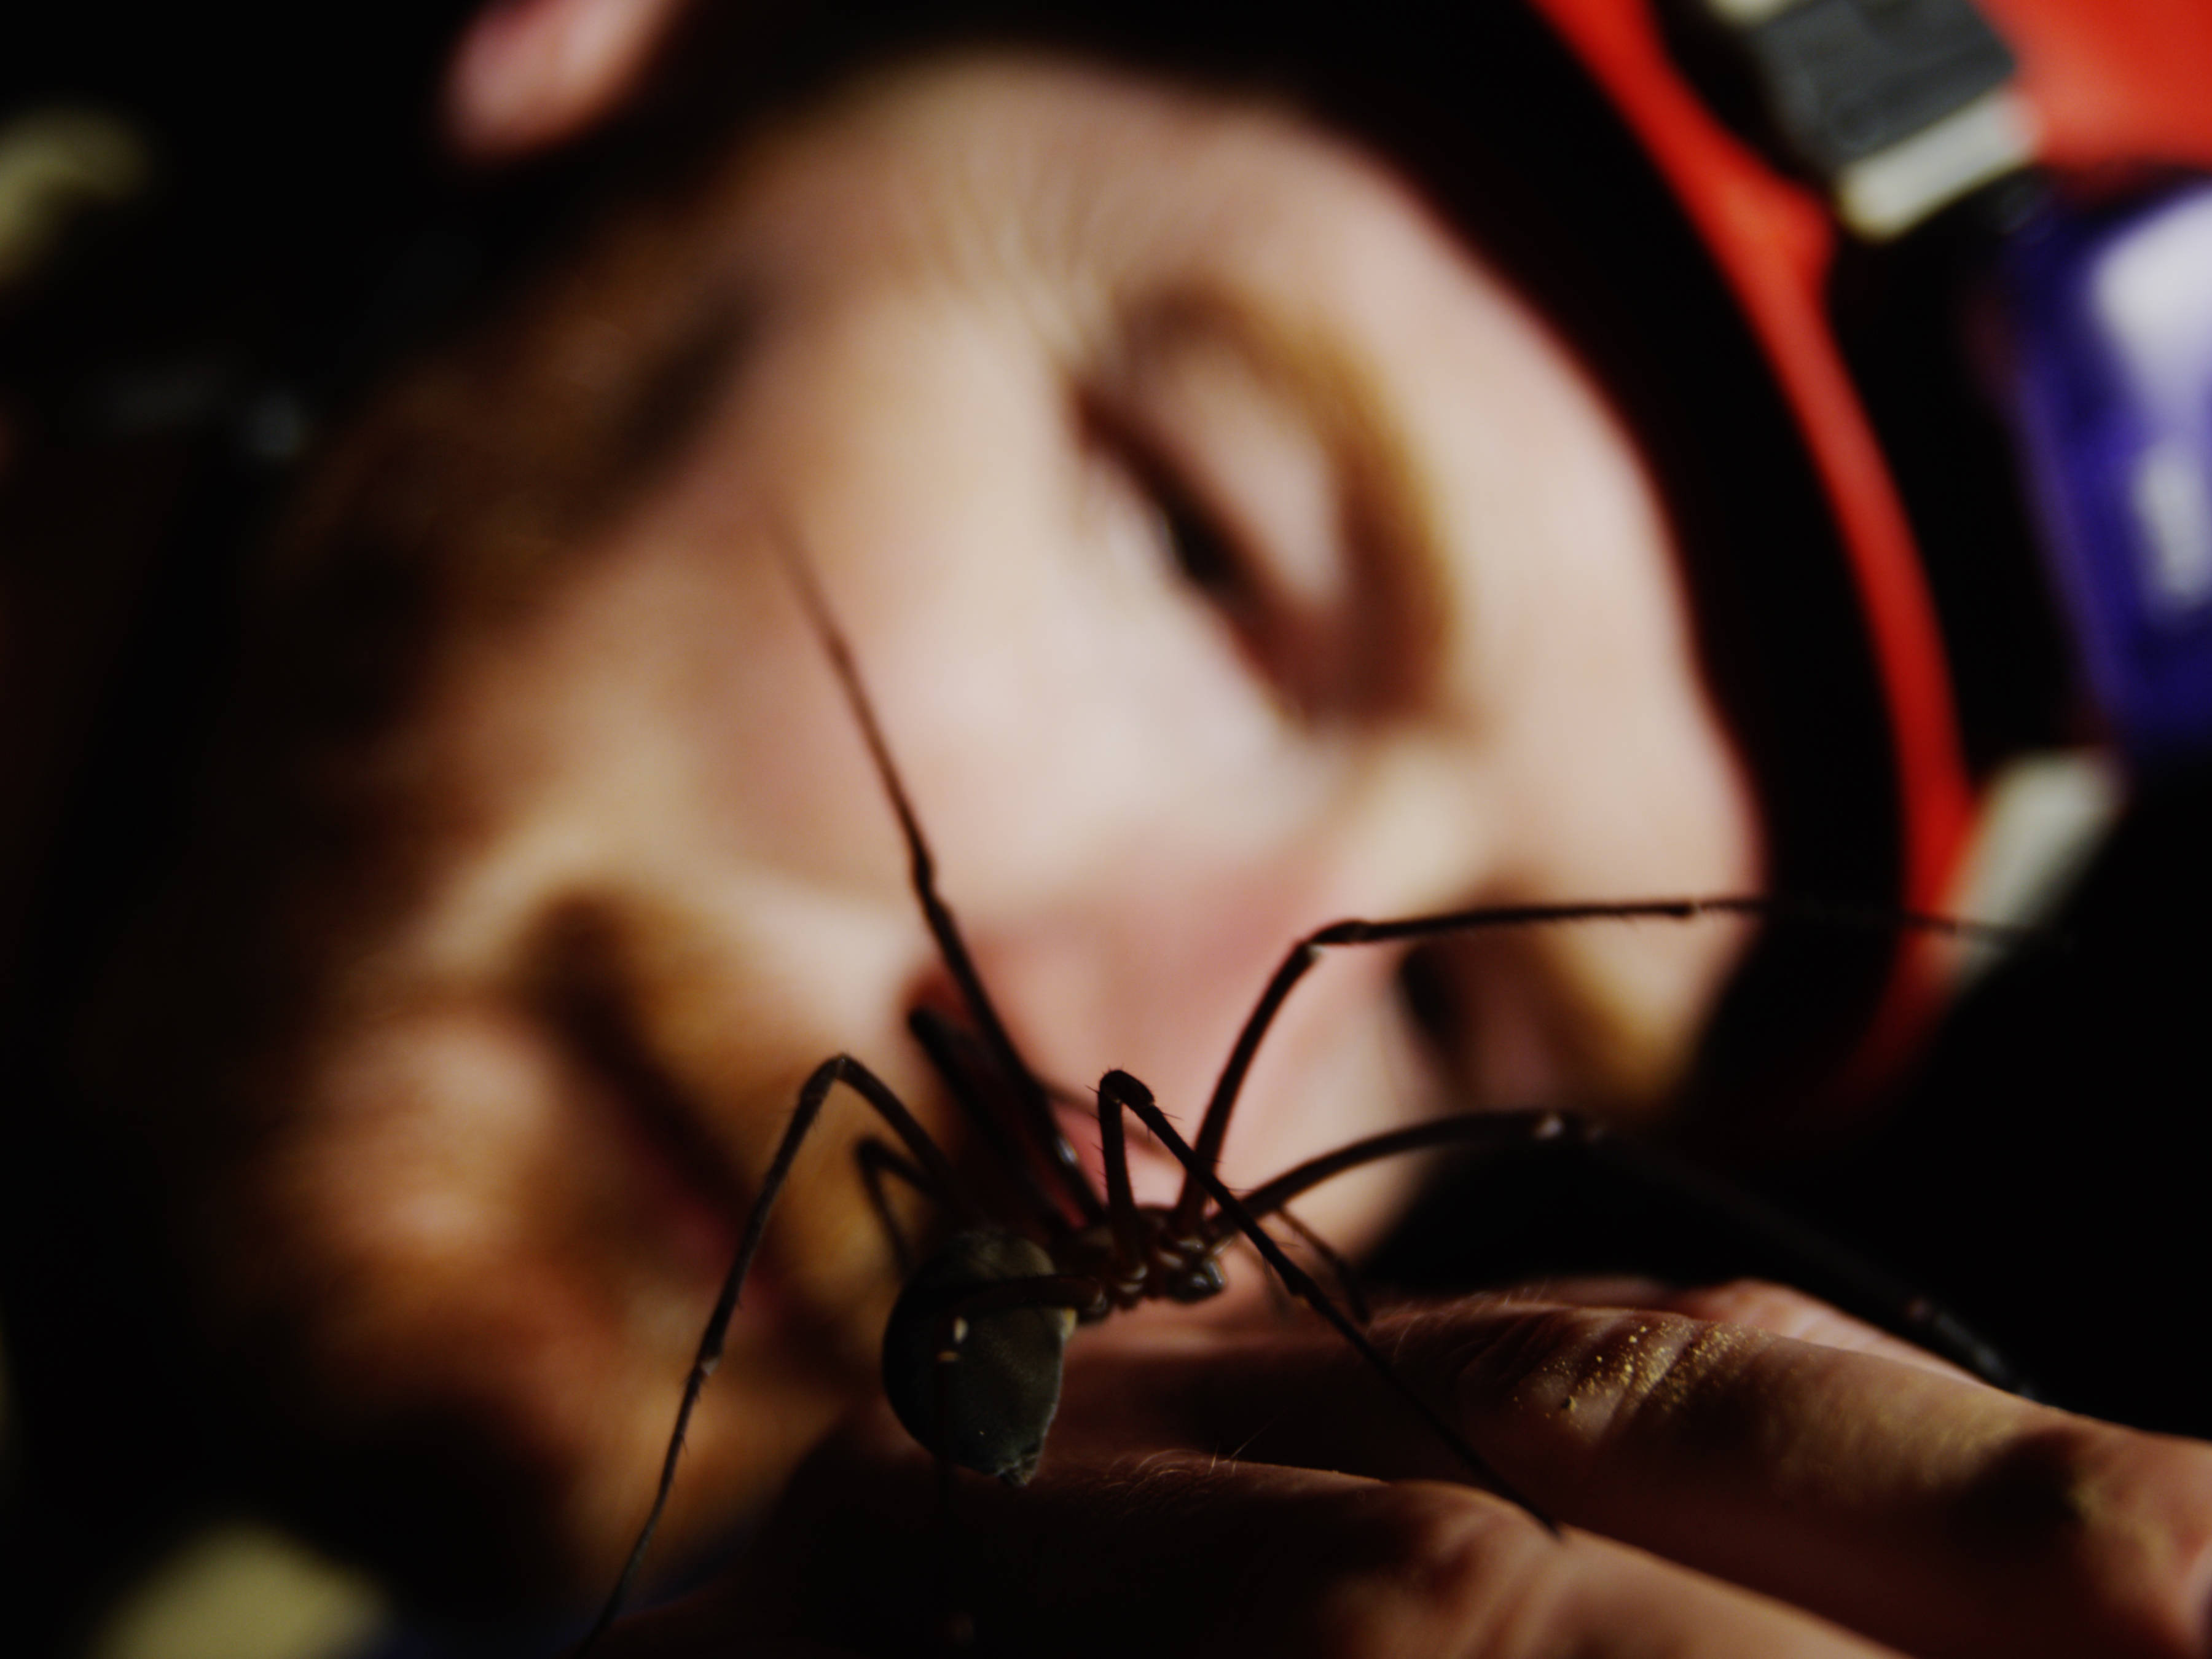 Close up of a Tasmanian cave spider. It is black with long legs and a large abdomen. The spider is on the hand of Bookend Trust Director, Niall Doran. In the background of the photo, slightly out of focus, is Niall’s face. Photo: Joe Shemesh.